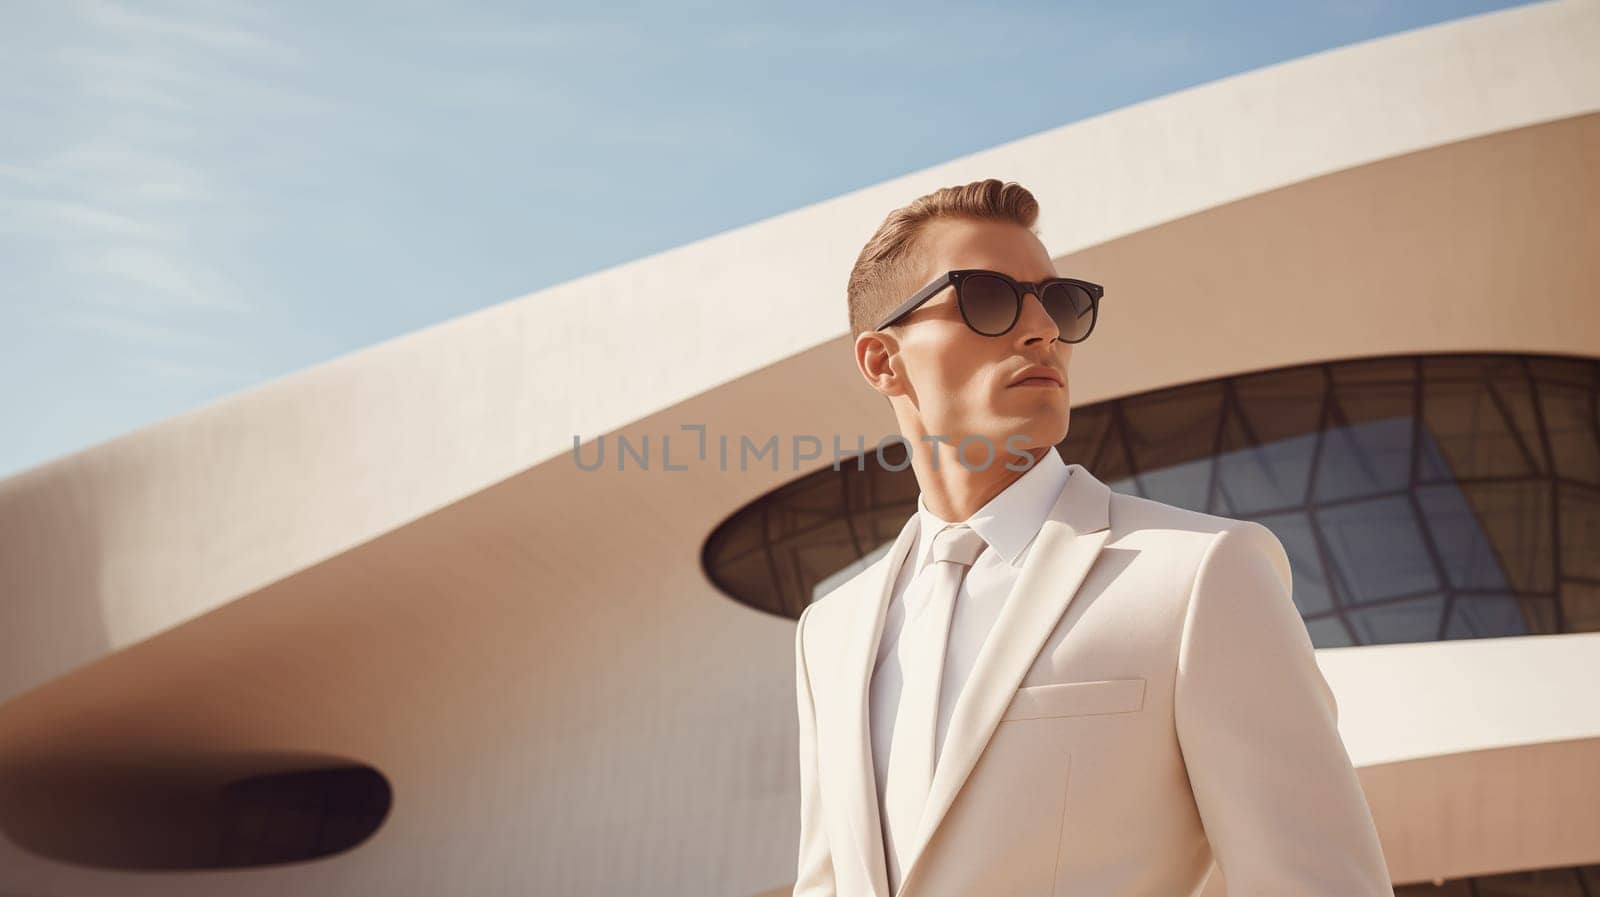 Fashion concept of successful stylish elegant man in white business suit looking away against the minimalism design architecture of a modern art museum building